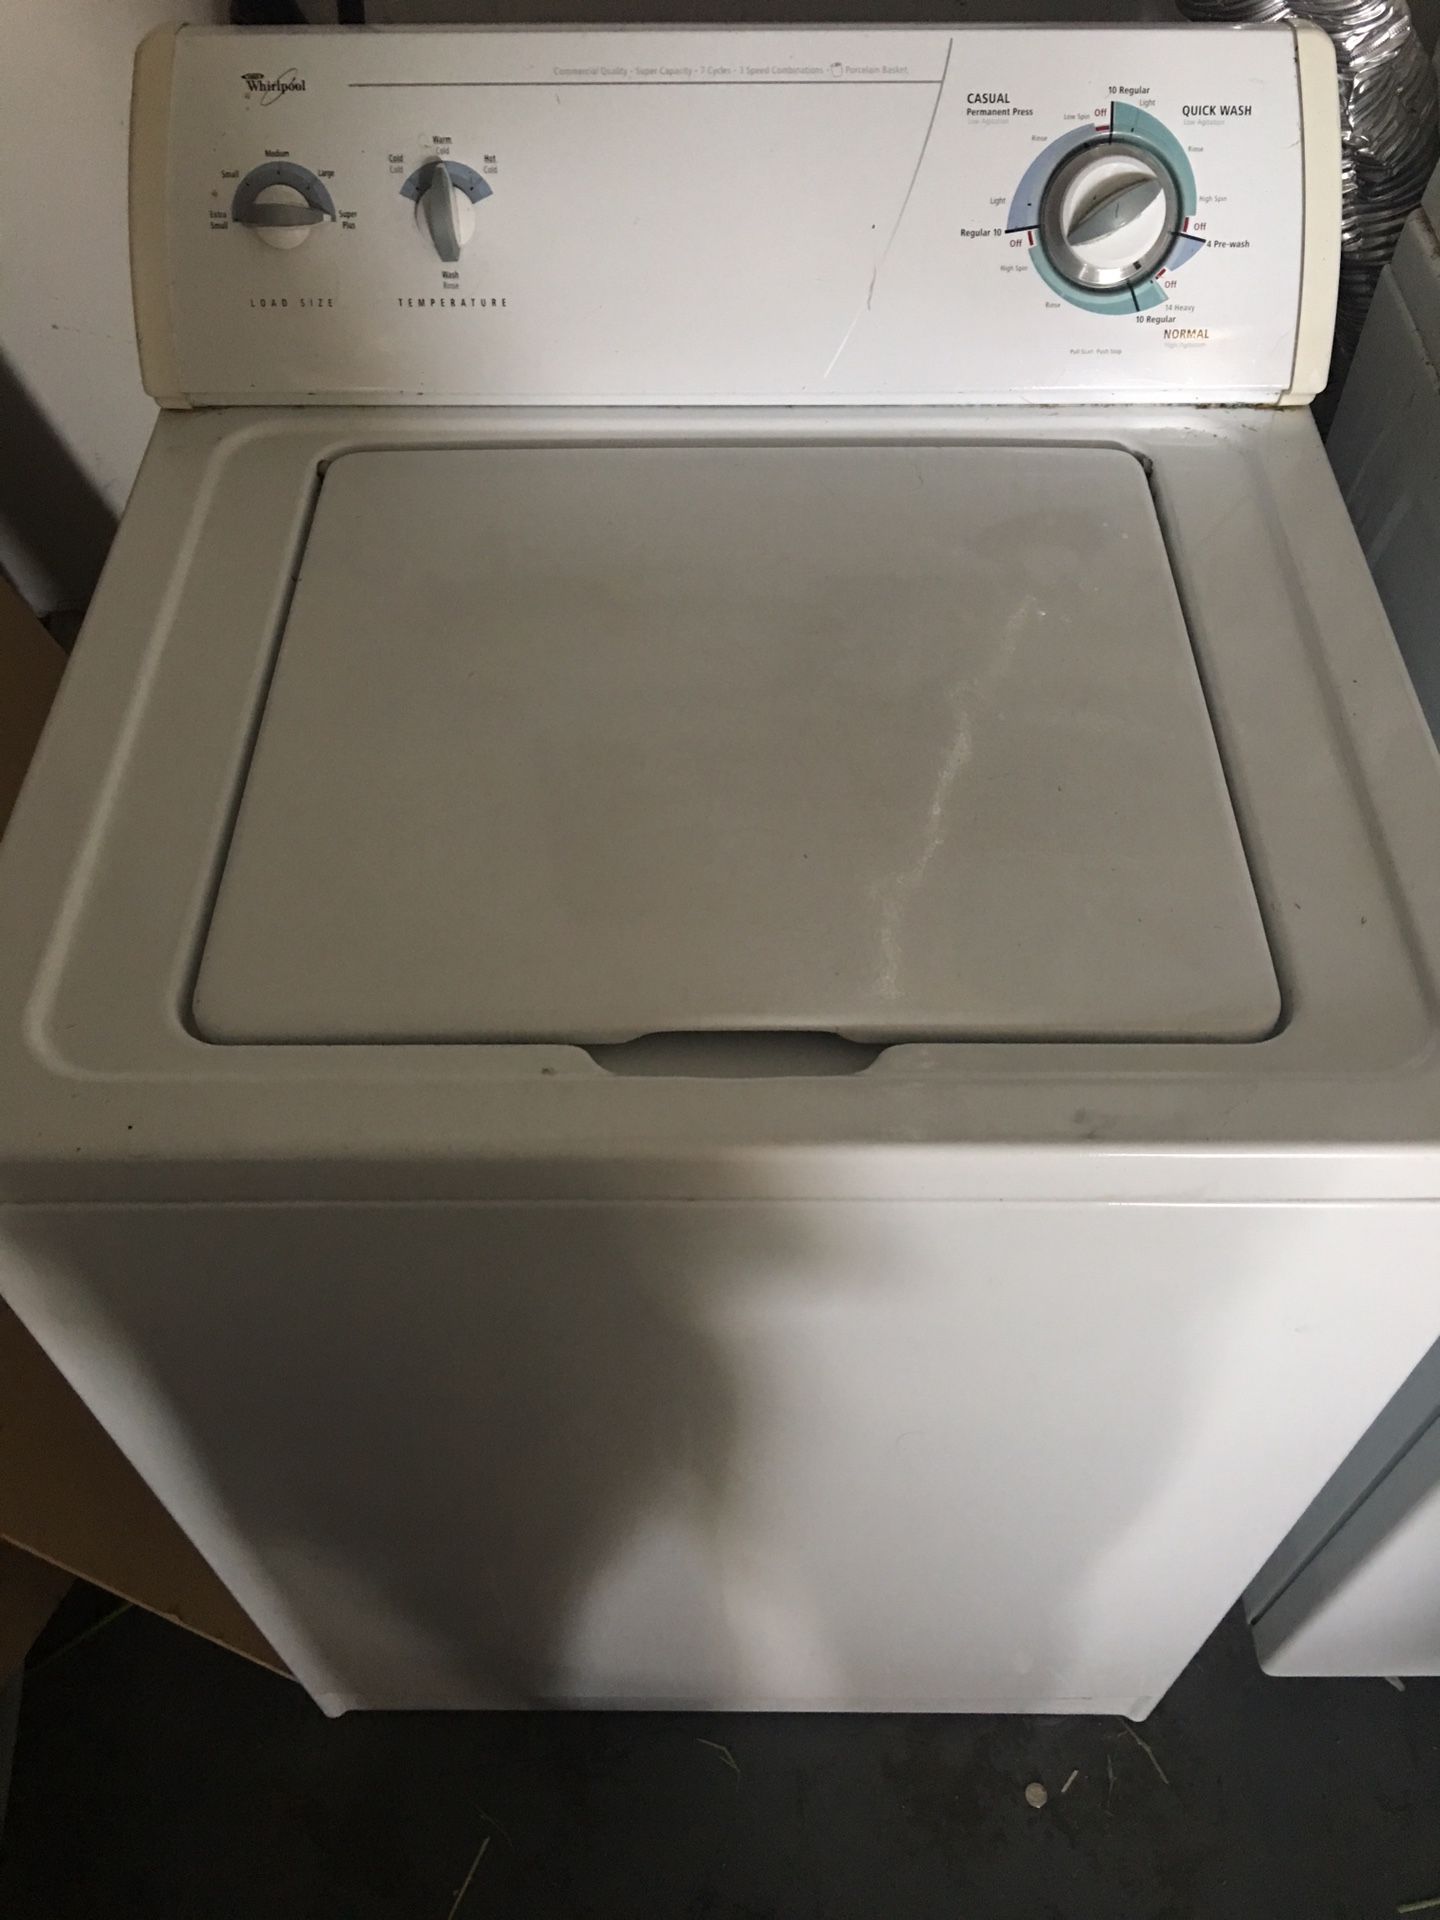 Whirlpool washer and dryer - like new!